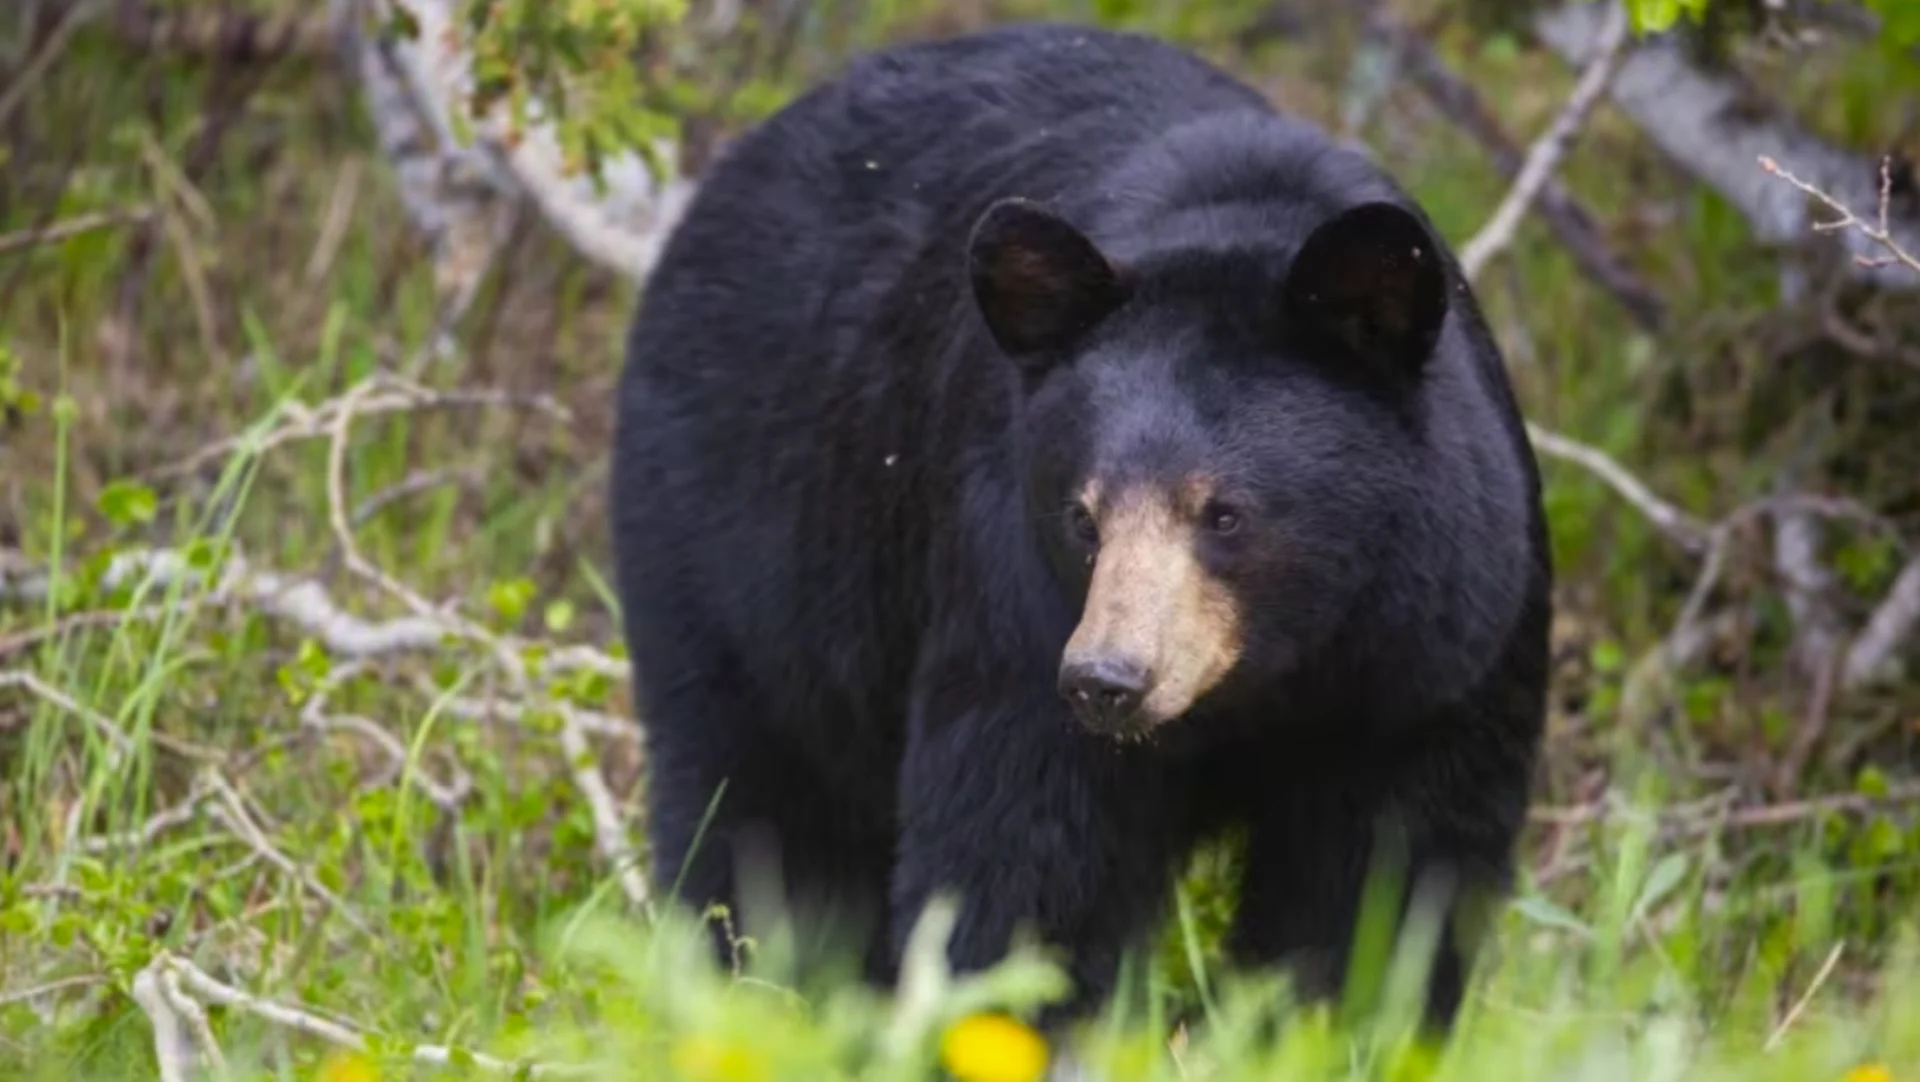 Keep your distance from bears to prevent them from getting too used to humans